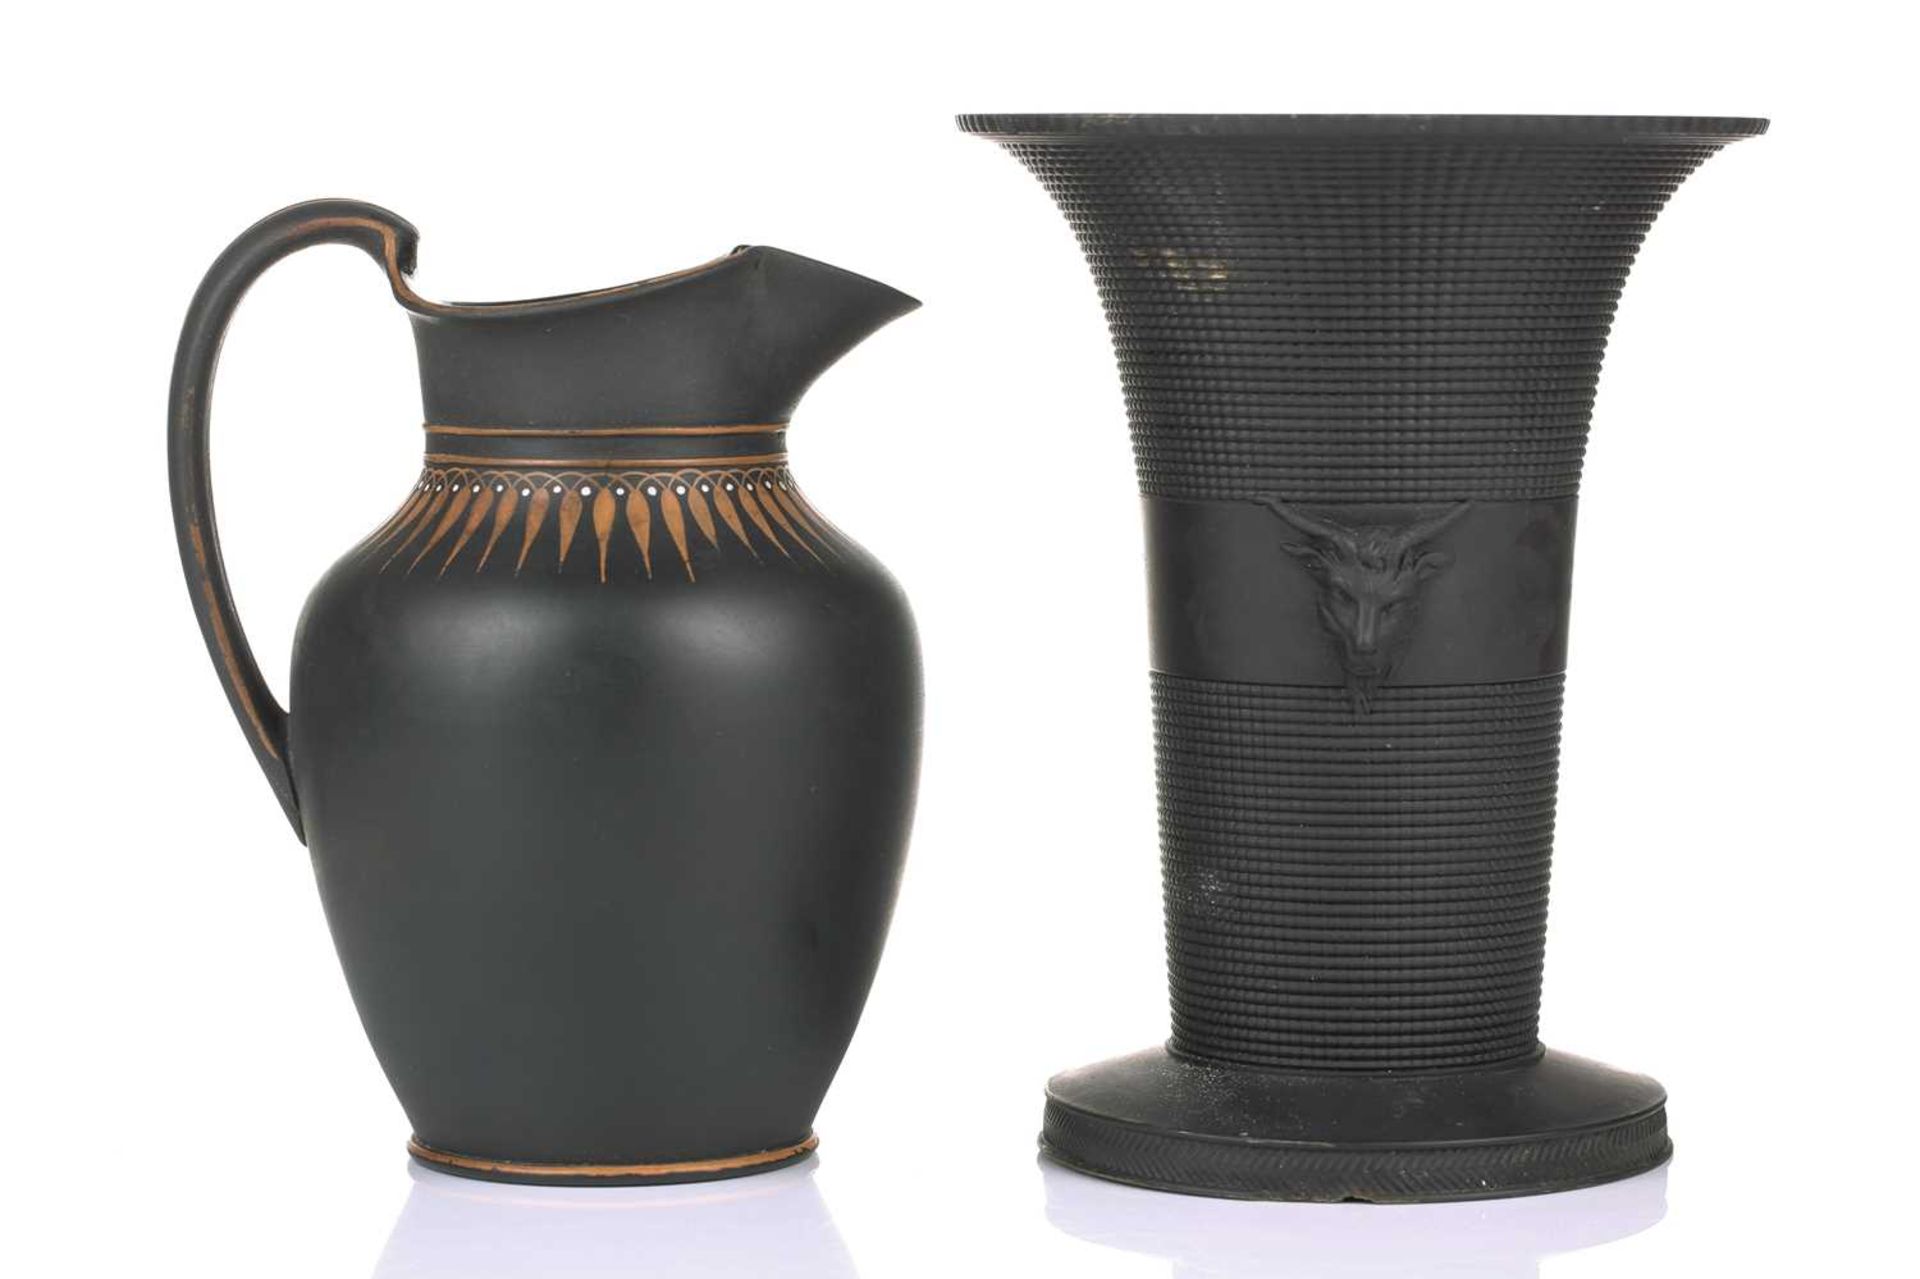 An early 19th century Wedgwood black basalt vase, of flared rim form with twin satyr mask